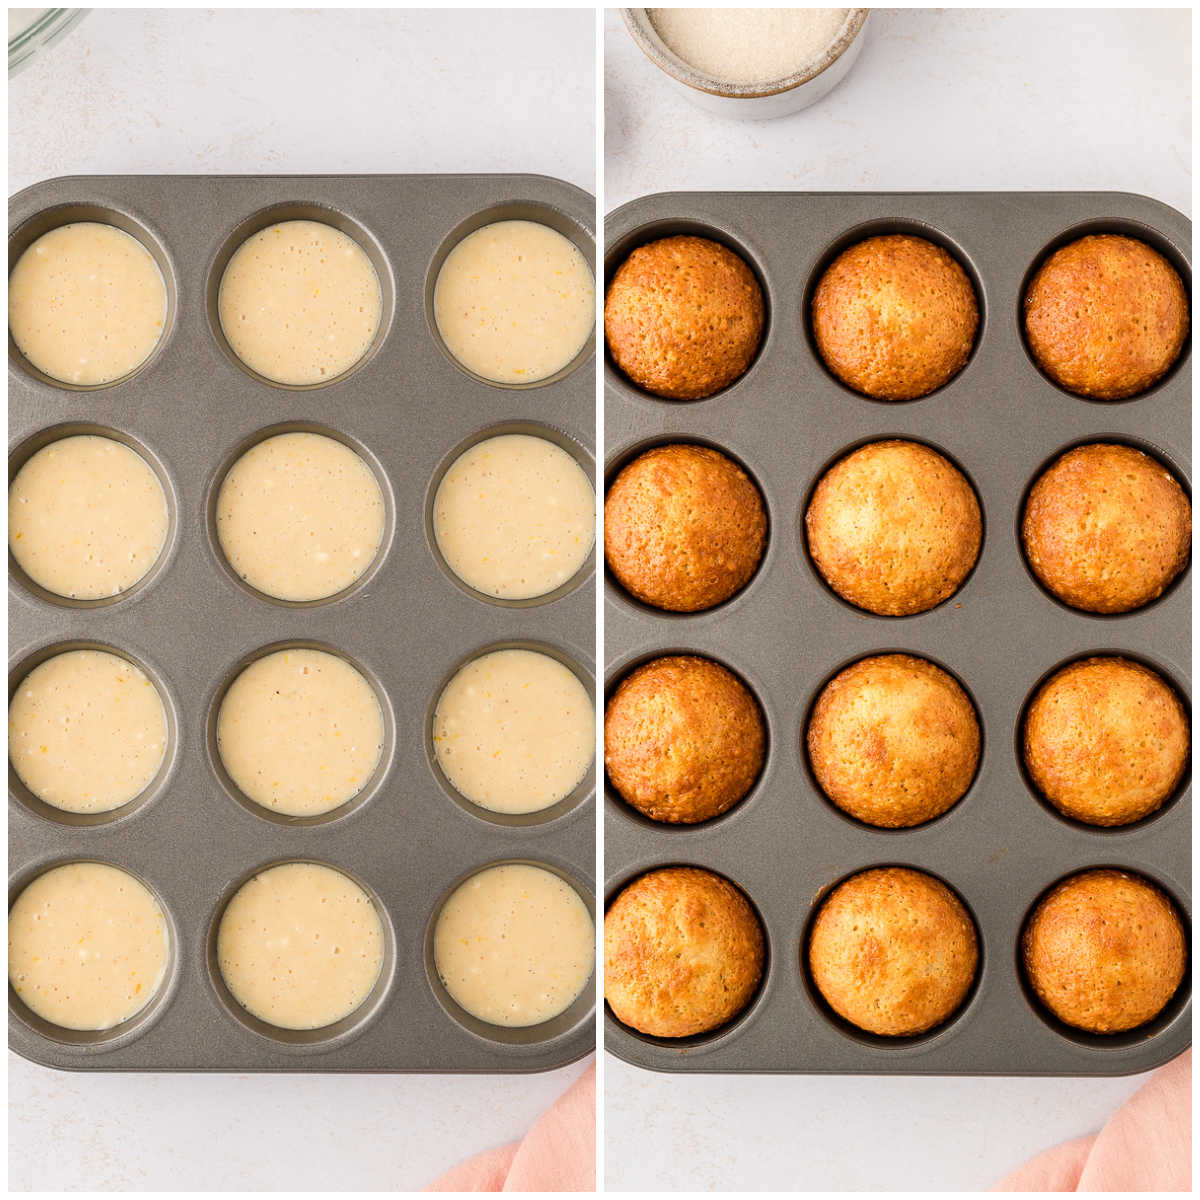 Steps to make sugar and spice muffins.